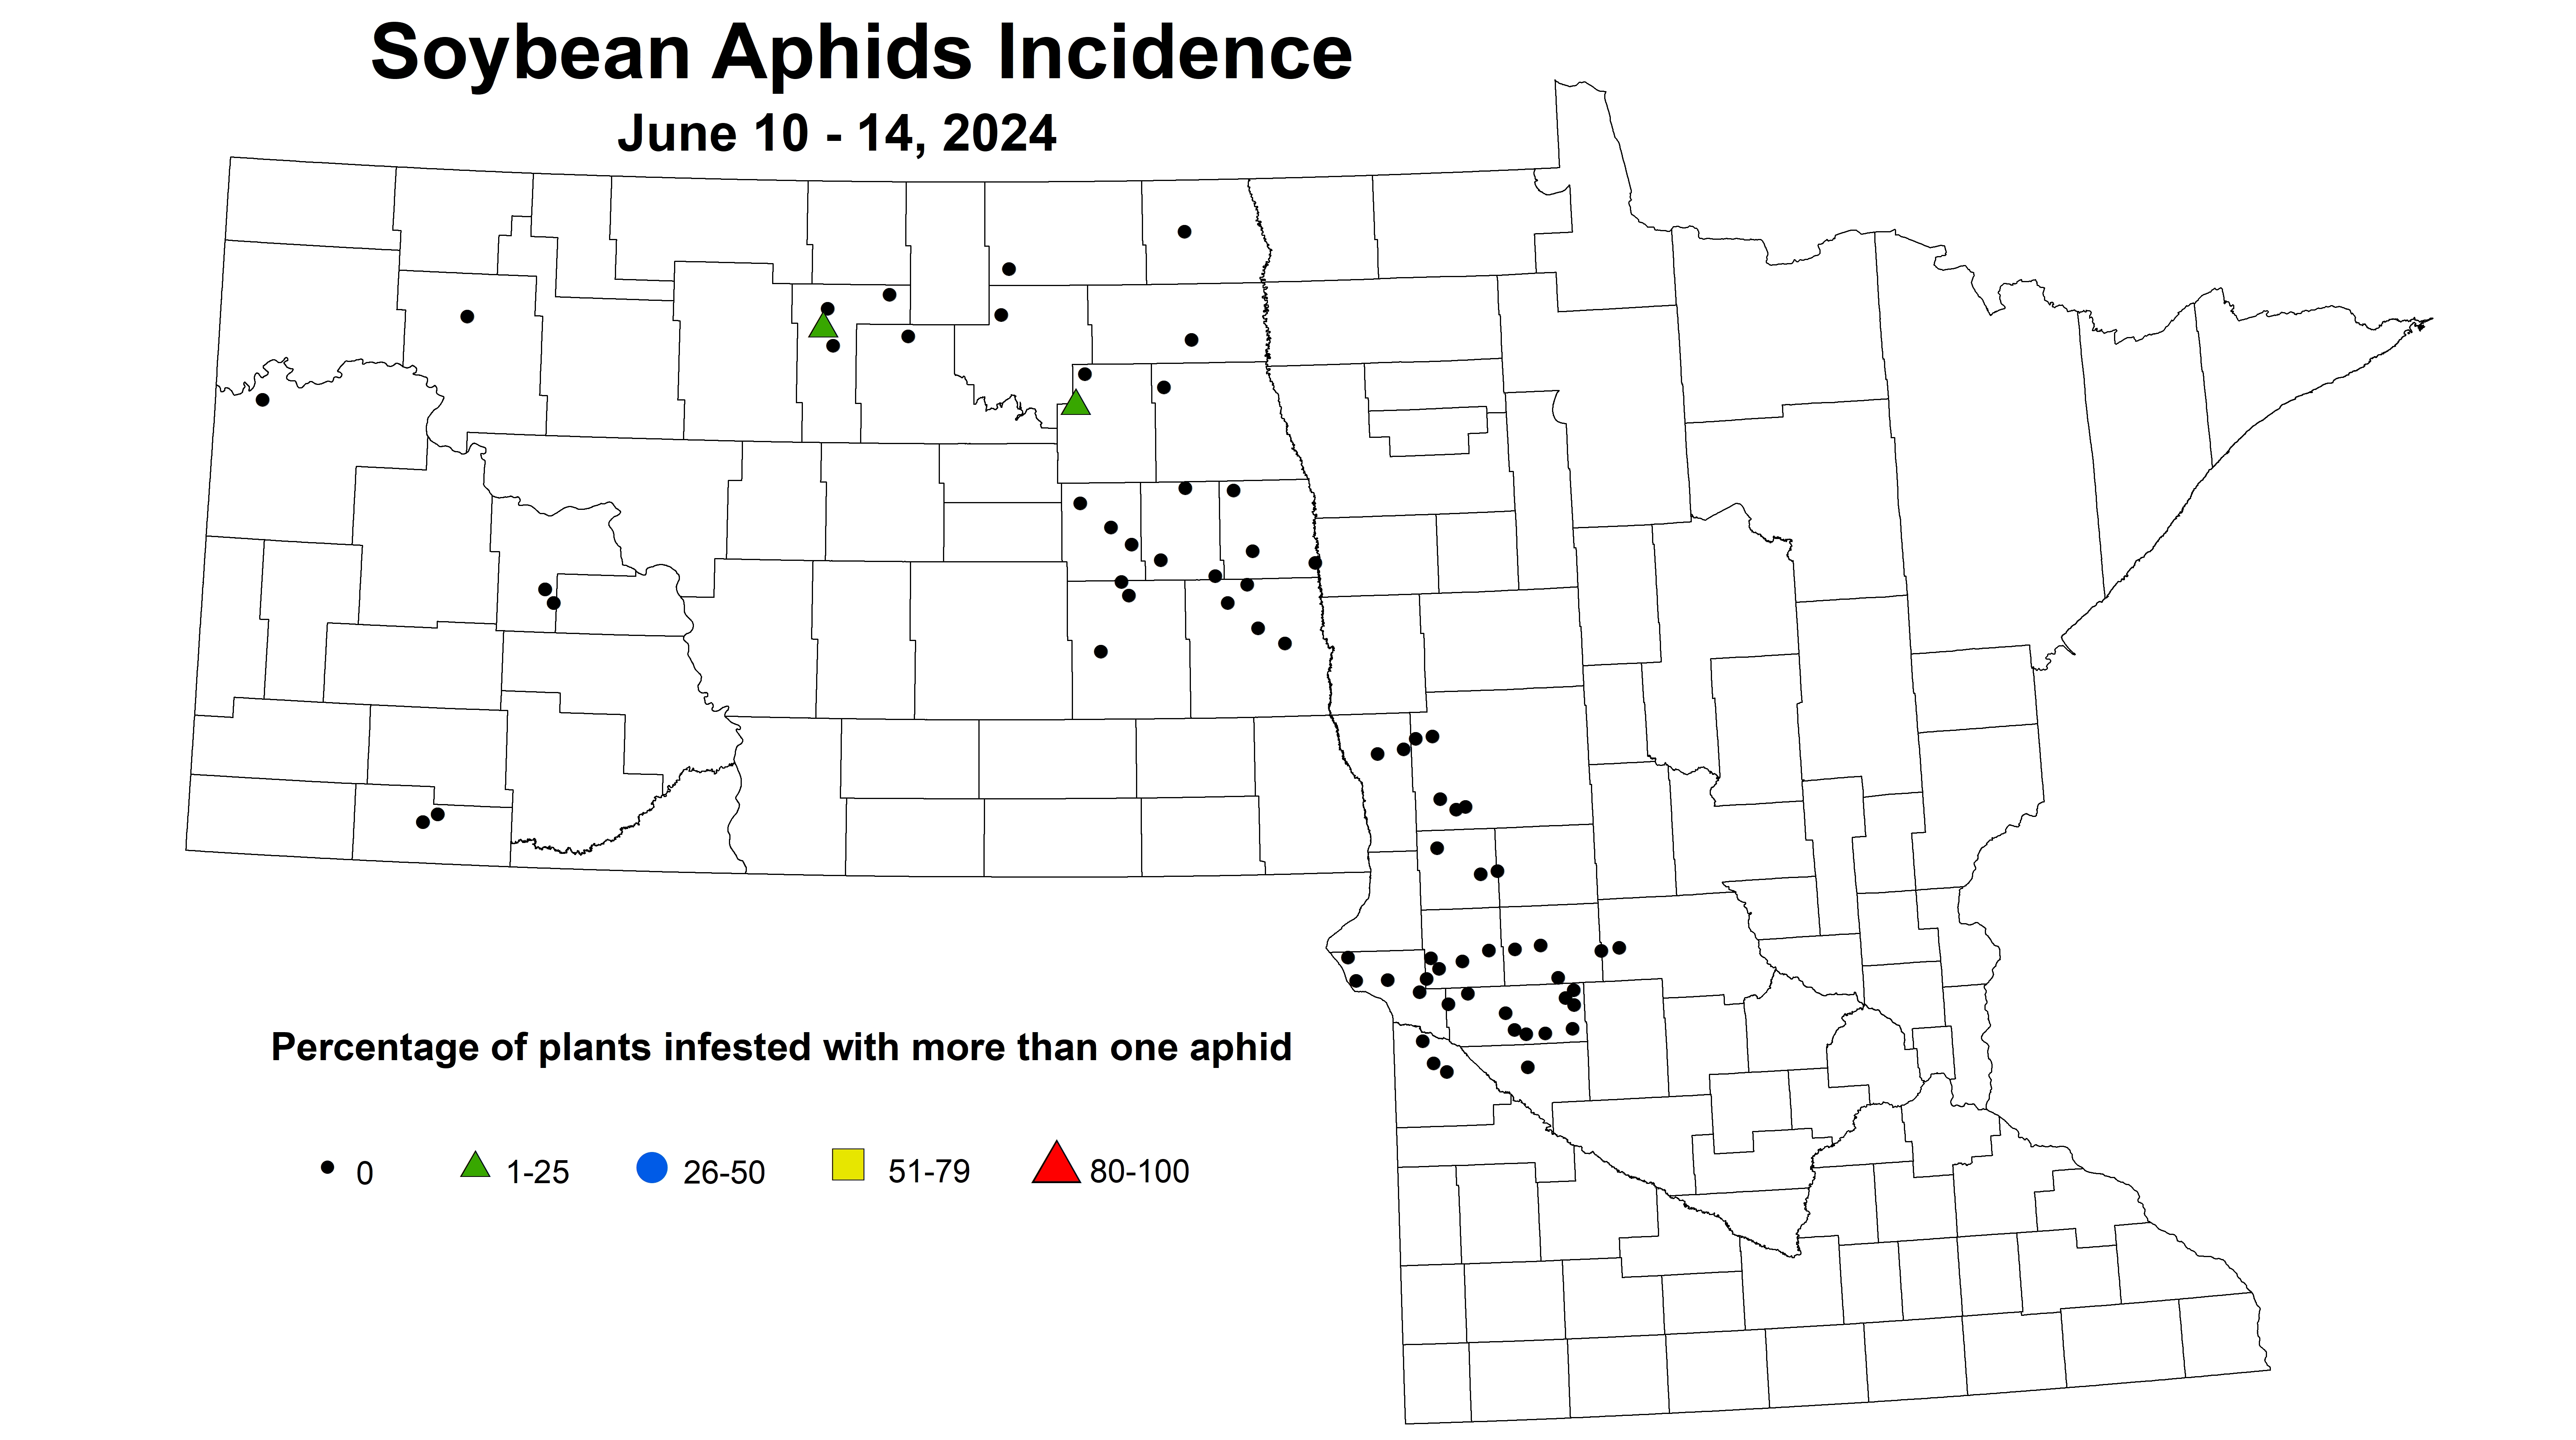 soybean aphids incidence June 10-14 2024